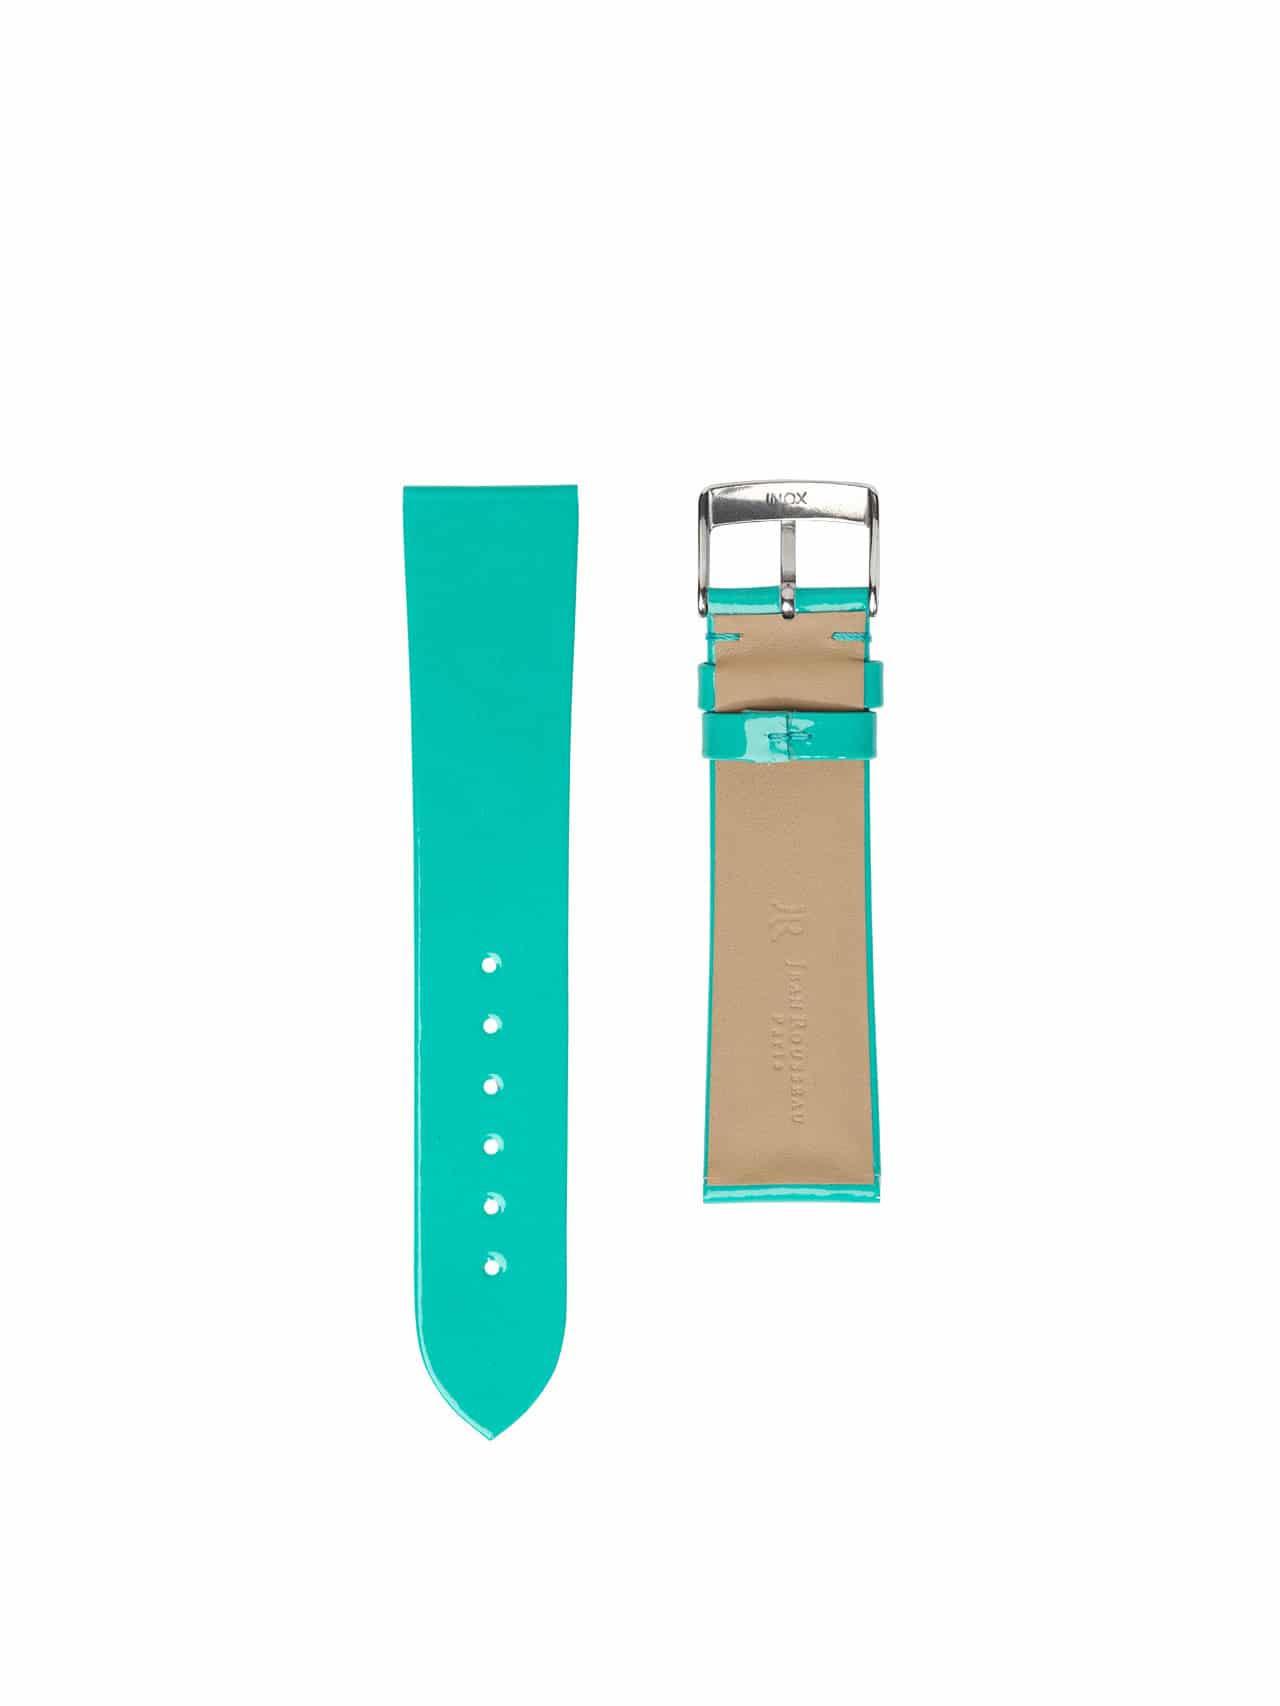 watch band Patent leather turquoise bright women